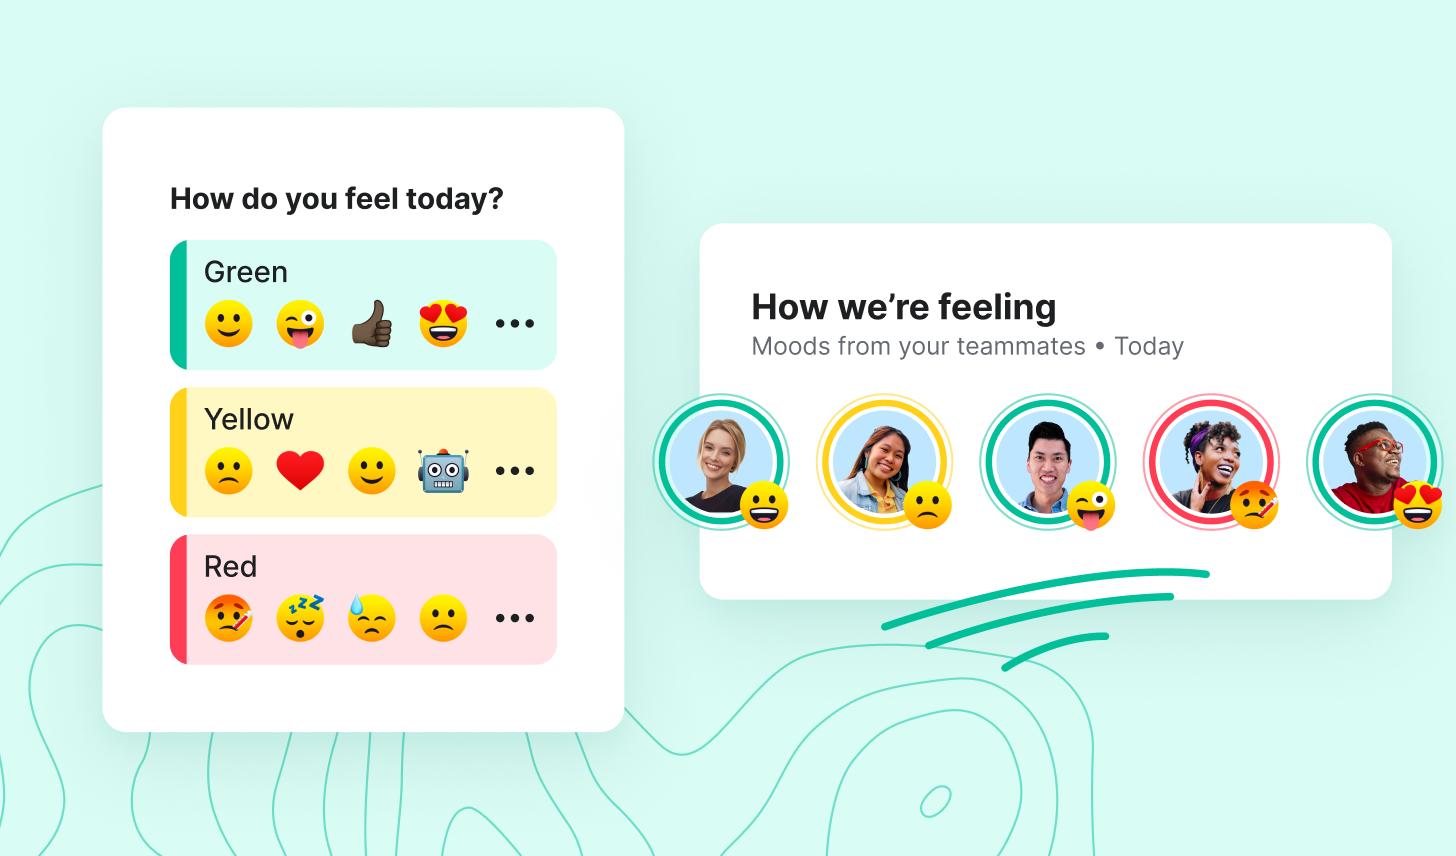 Highlight of mood-sharing functionality in Range that features how teammates are feeling on a red-yellow-green scale with emojis